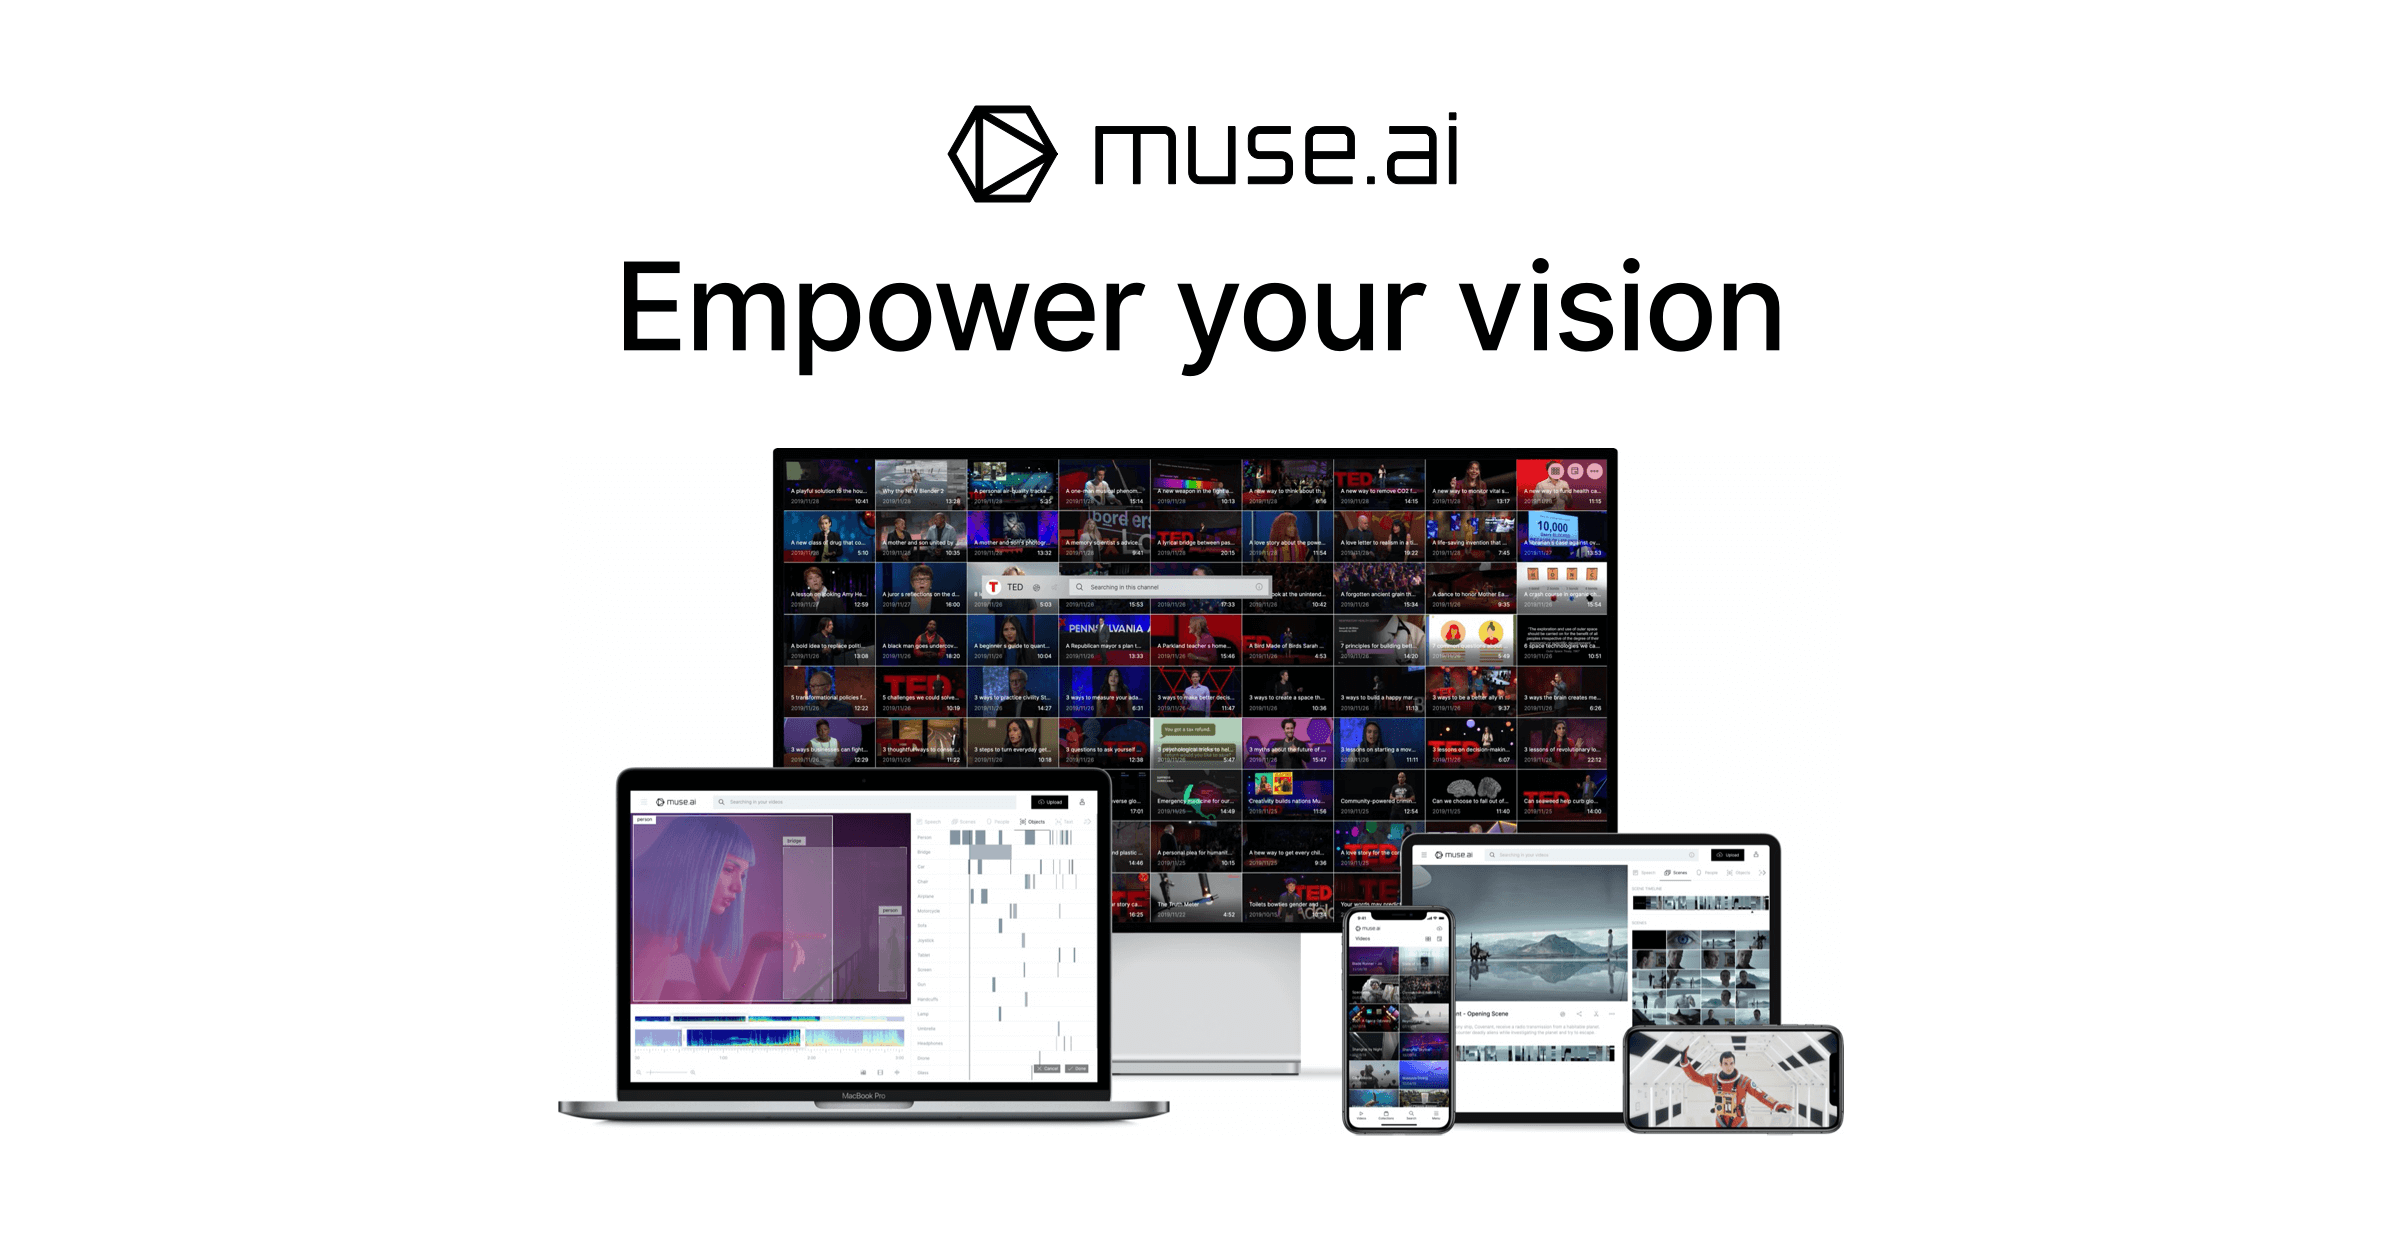 Muse AI - An all-in-one video hosting provides 4K playback, analytics, and AI search